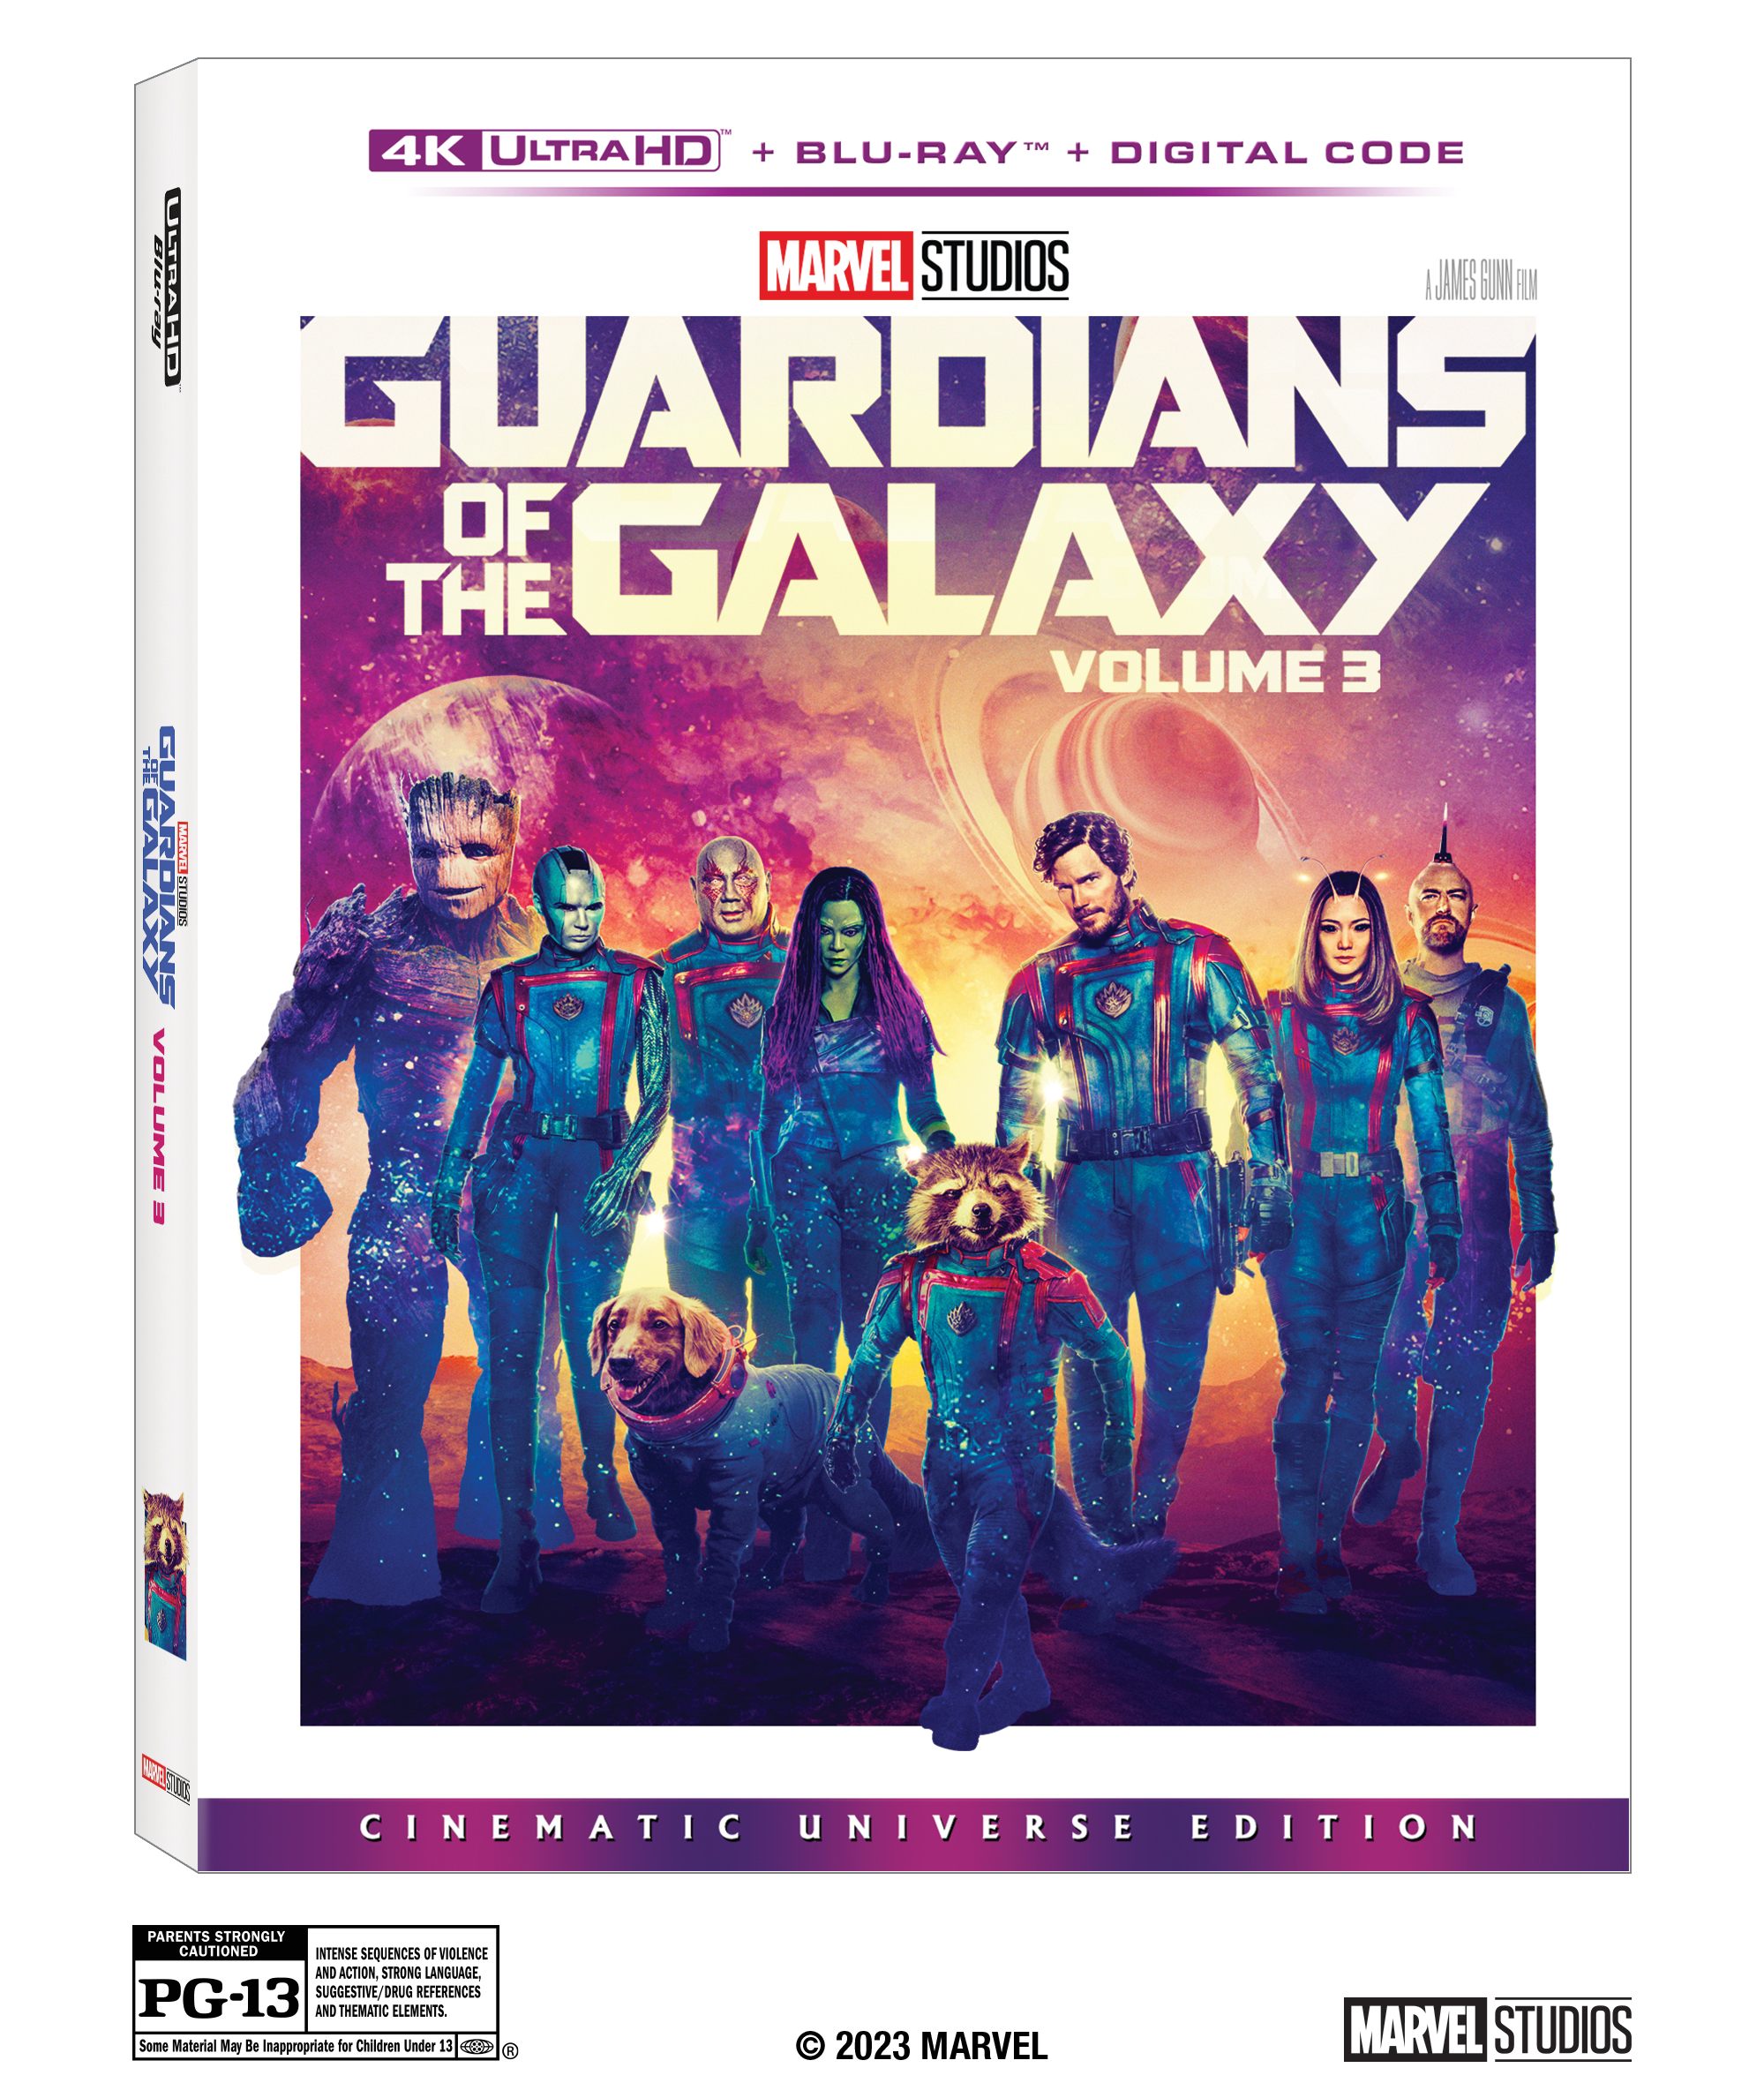 Guardians of the Galaxy Vol. 3 arrives on 4K Ultra HD, Blu-ray August 1